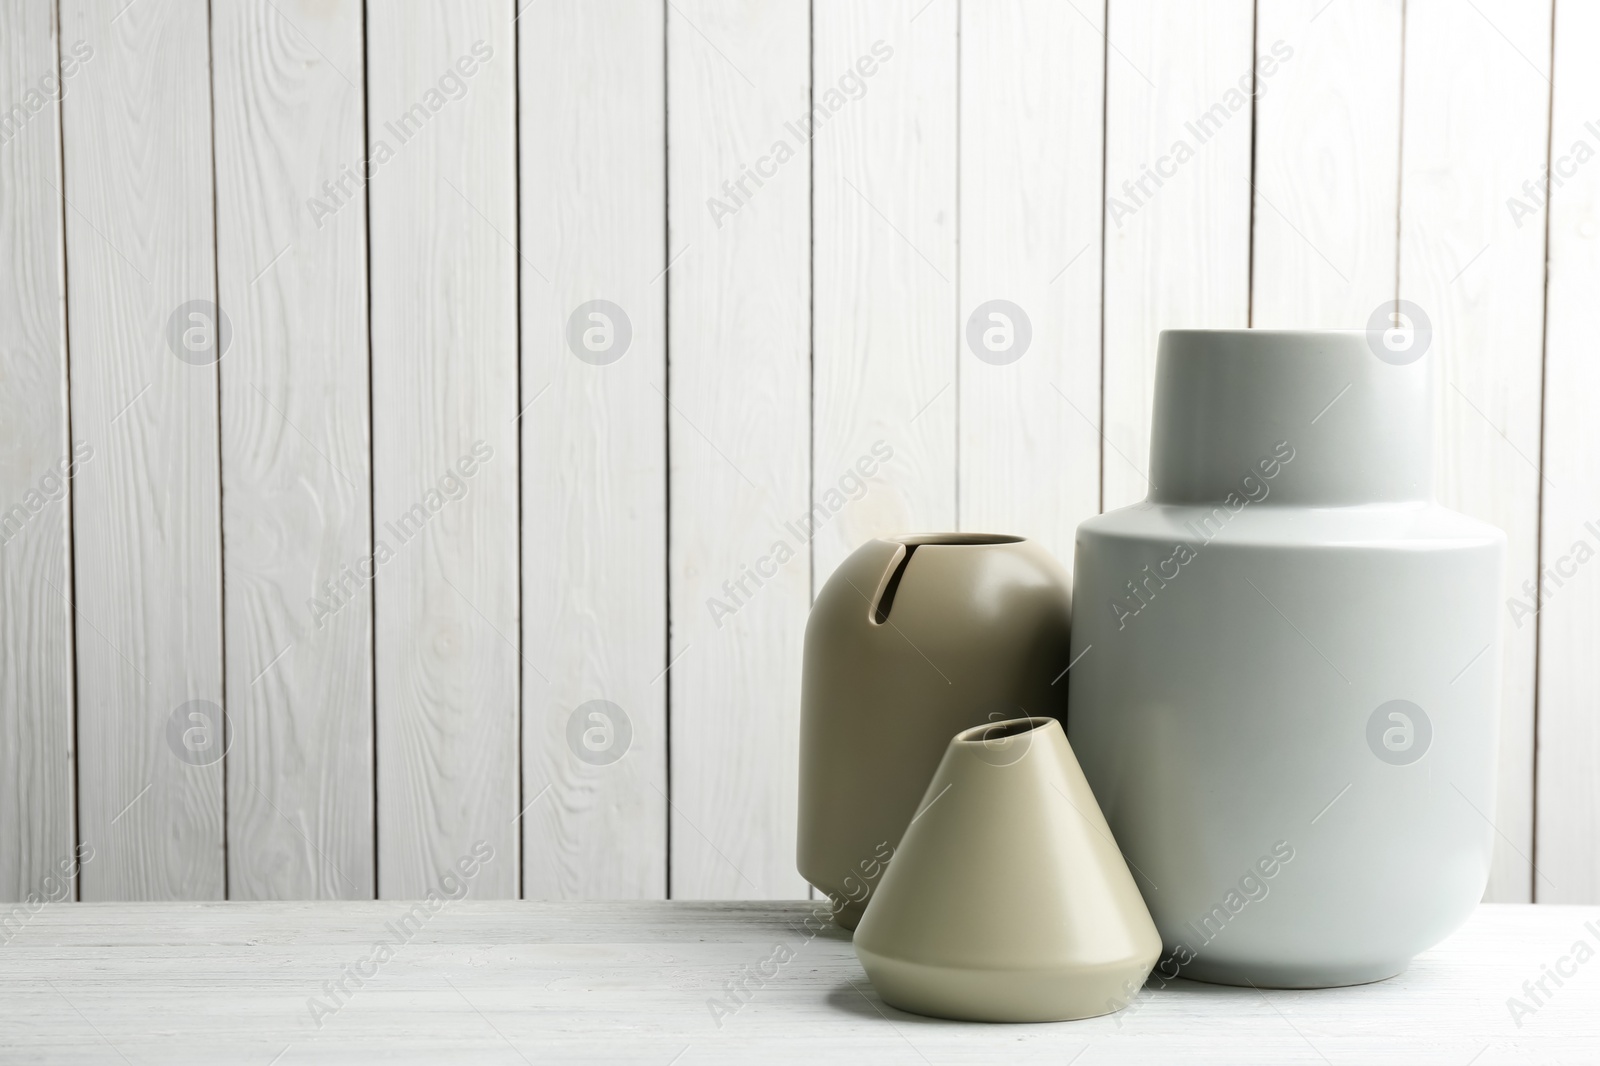 Photo of Stylish ceramic vases on white wooden table. Space for text